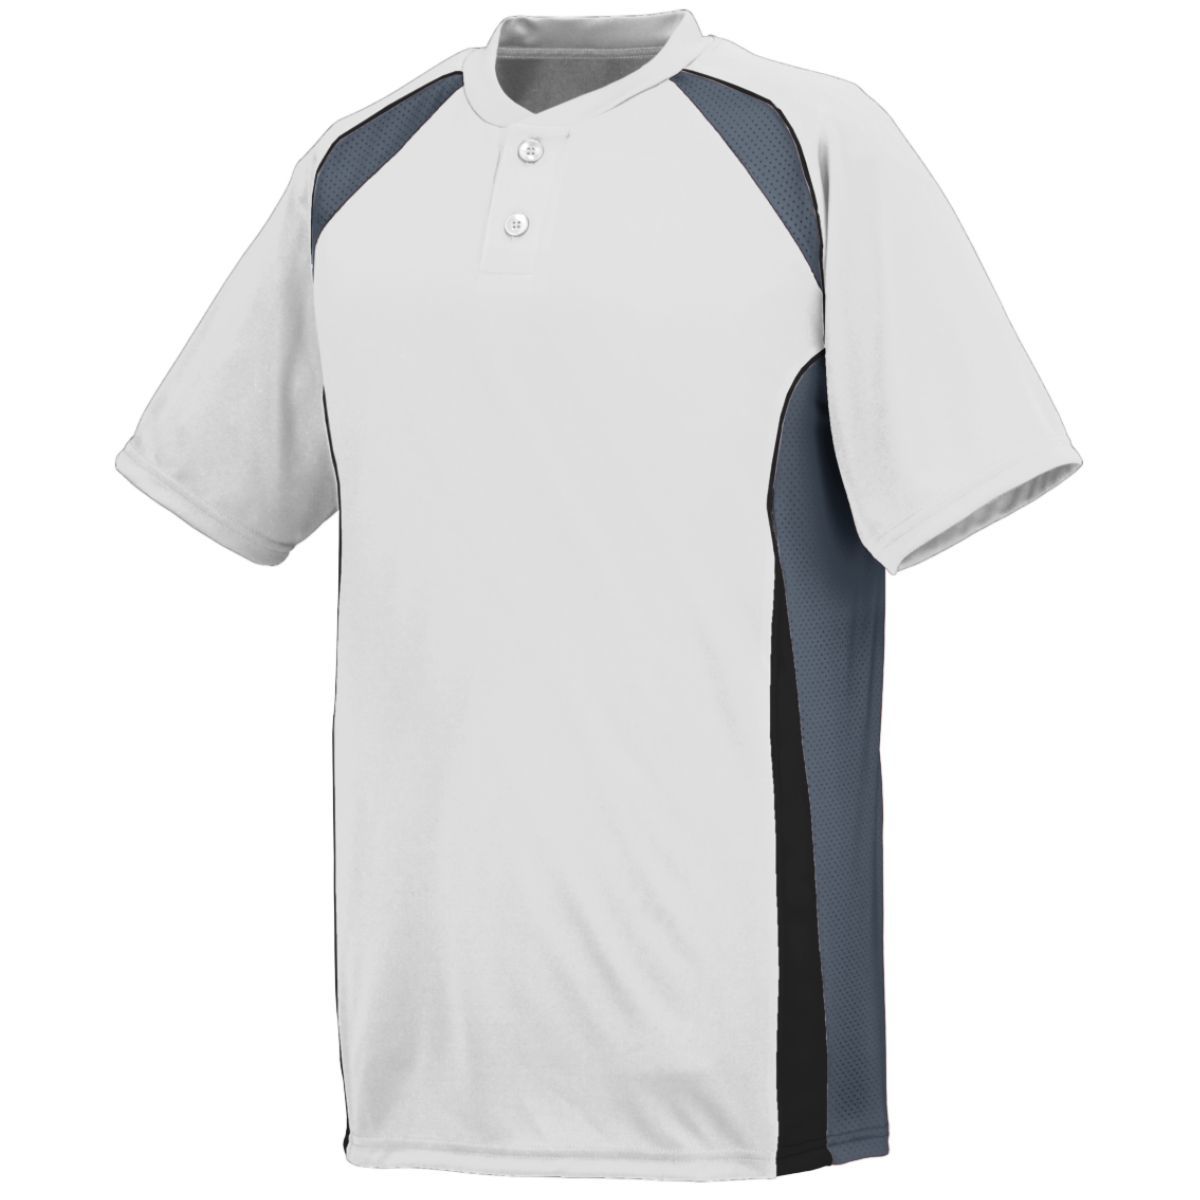 Augusta Sportswear Base Hit Jersey in White/Graphite/Black  -Part of the Adult, Adult-Jersey, Augusta-Products, Baseball, Shirts, All-Sports, All-Sports-1 product lines at KanaleyCreations.com